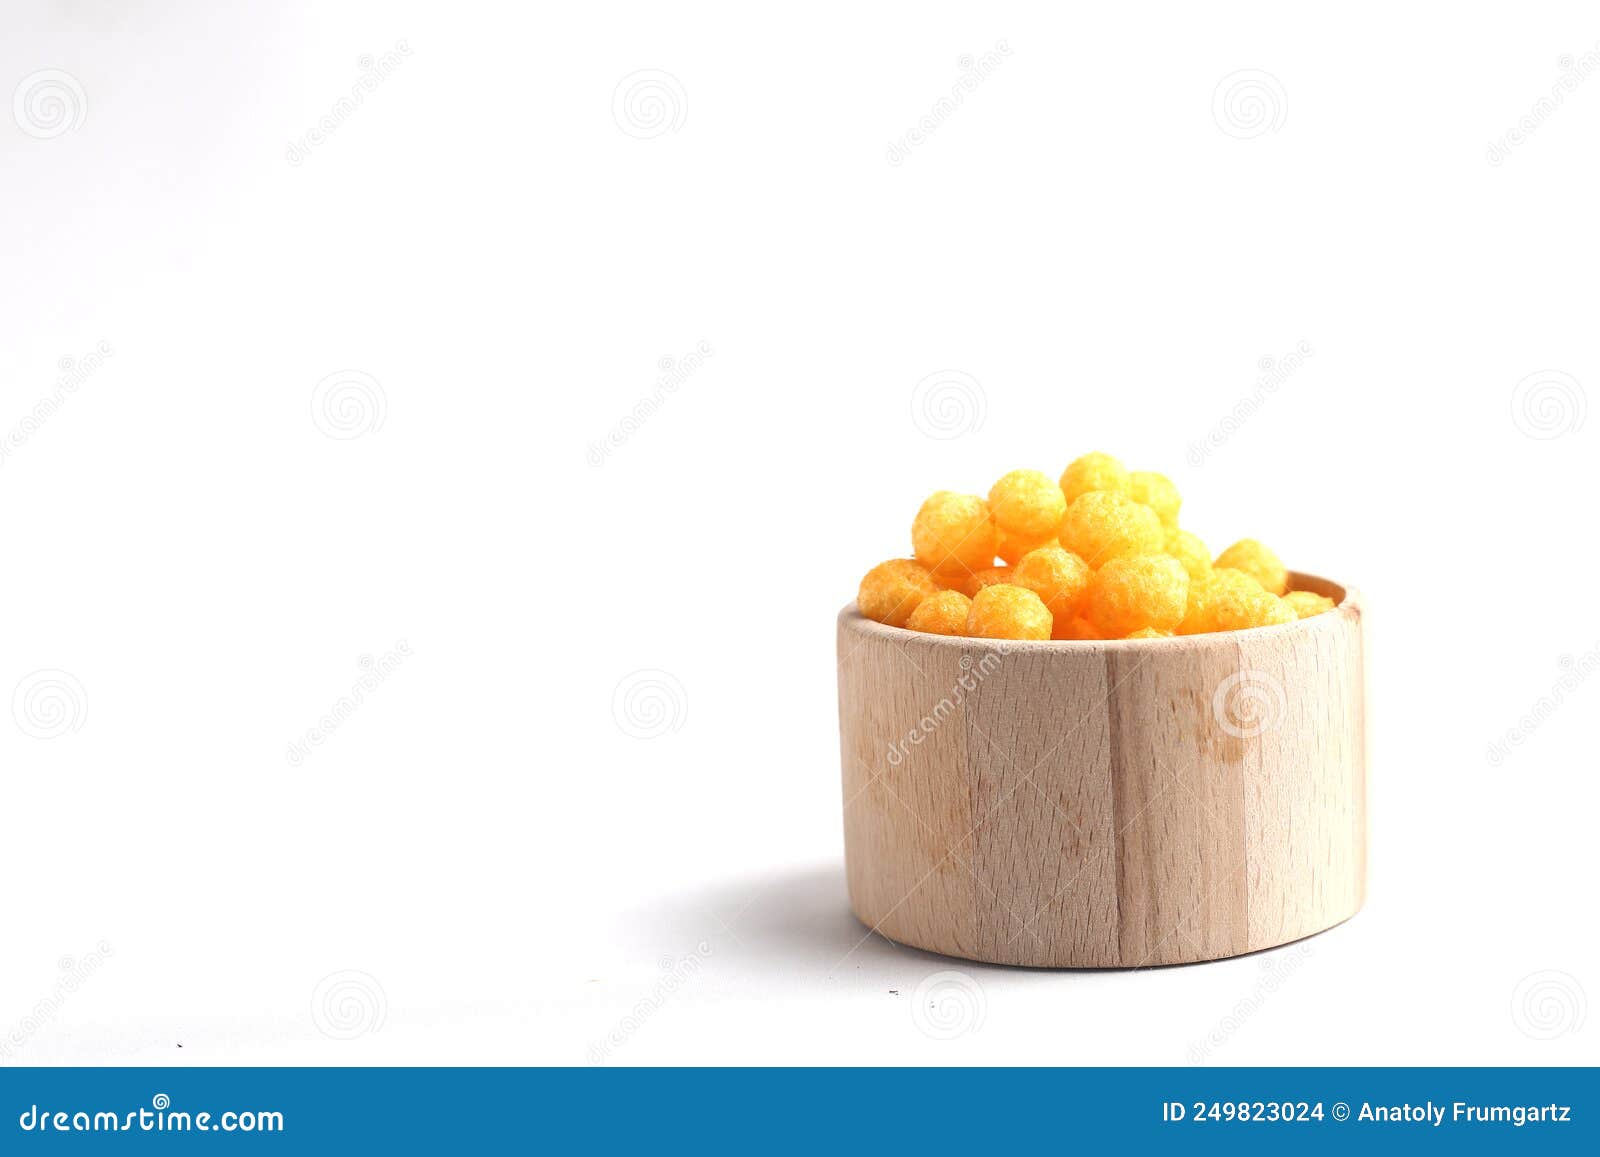 3+ Thousand Cheese Balls Chips Royalty-Free Images, Stock Photos